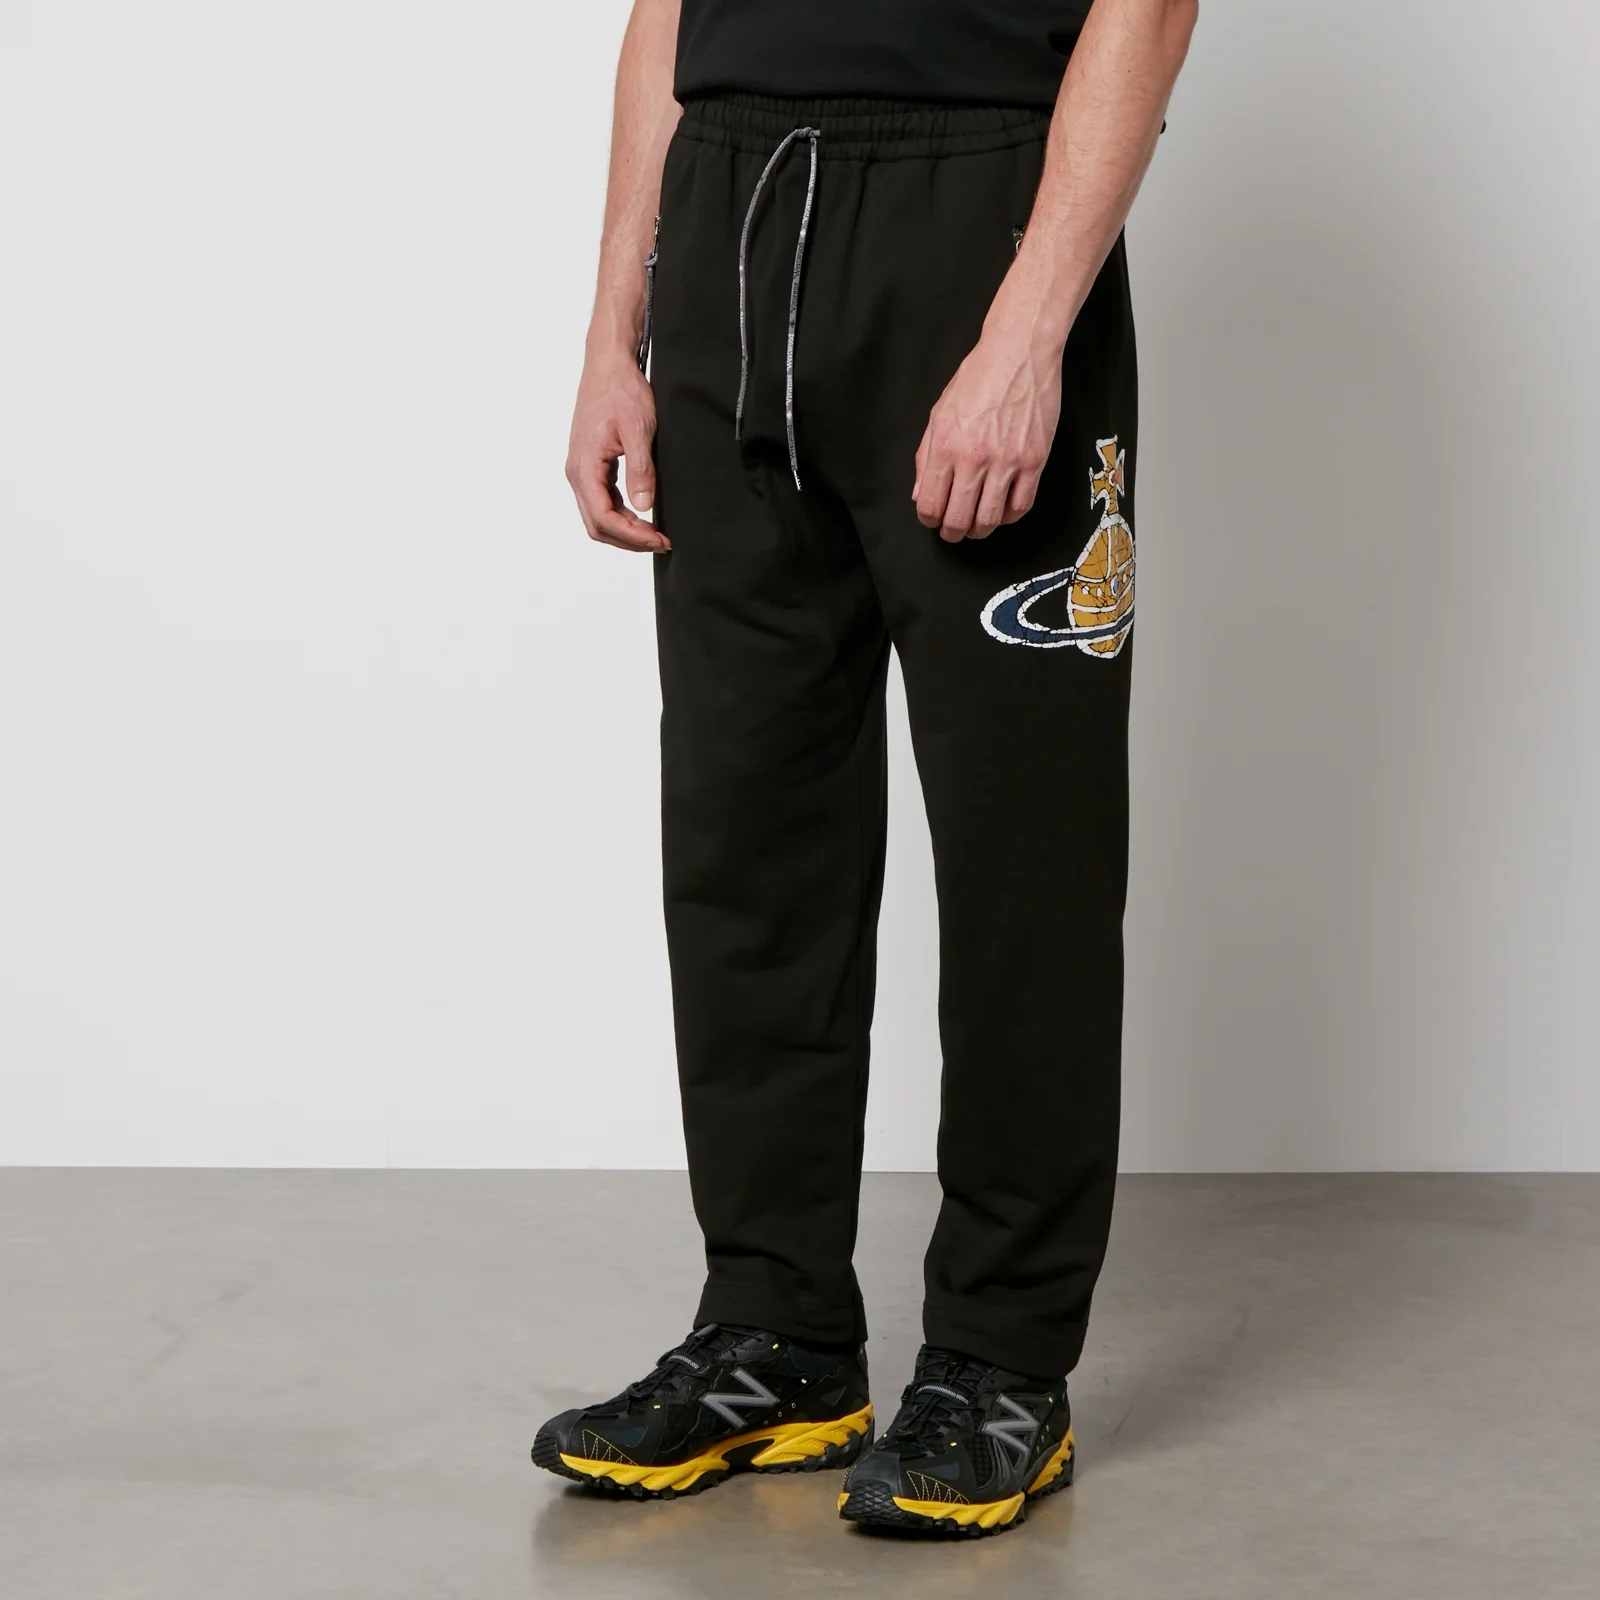 Vivienne Westwood Time Machine Football Cotton-Jersey Trousers Image 1